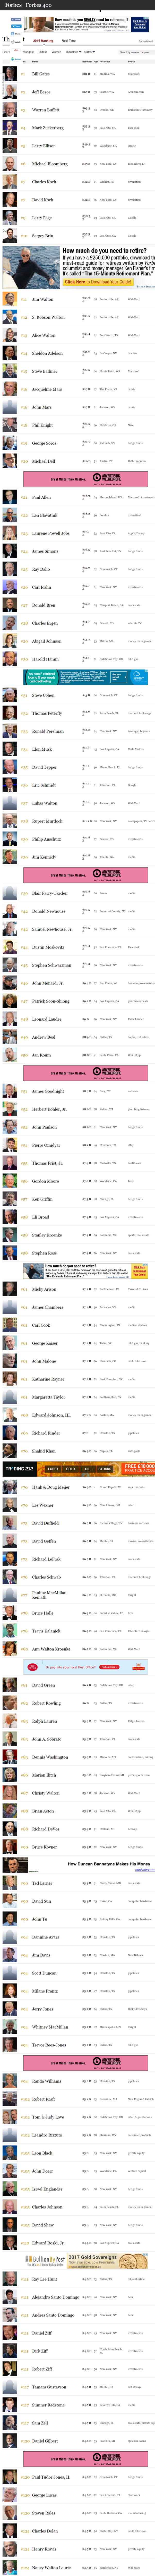 Forbes 400 - 2016.png